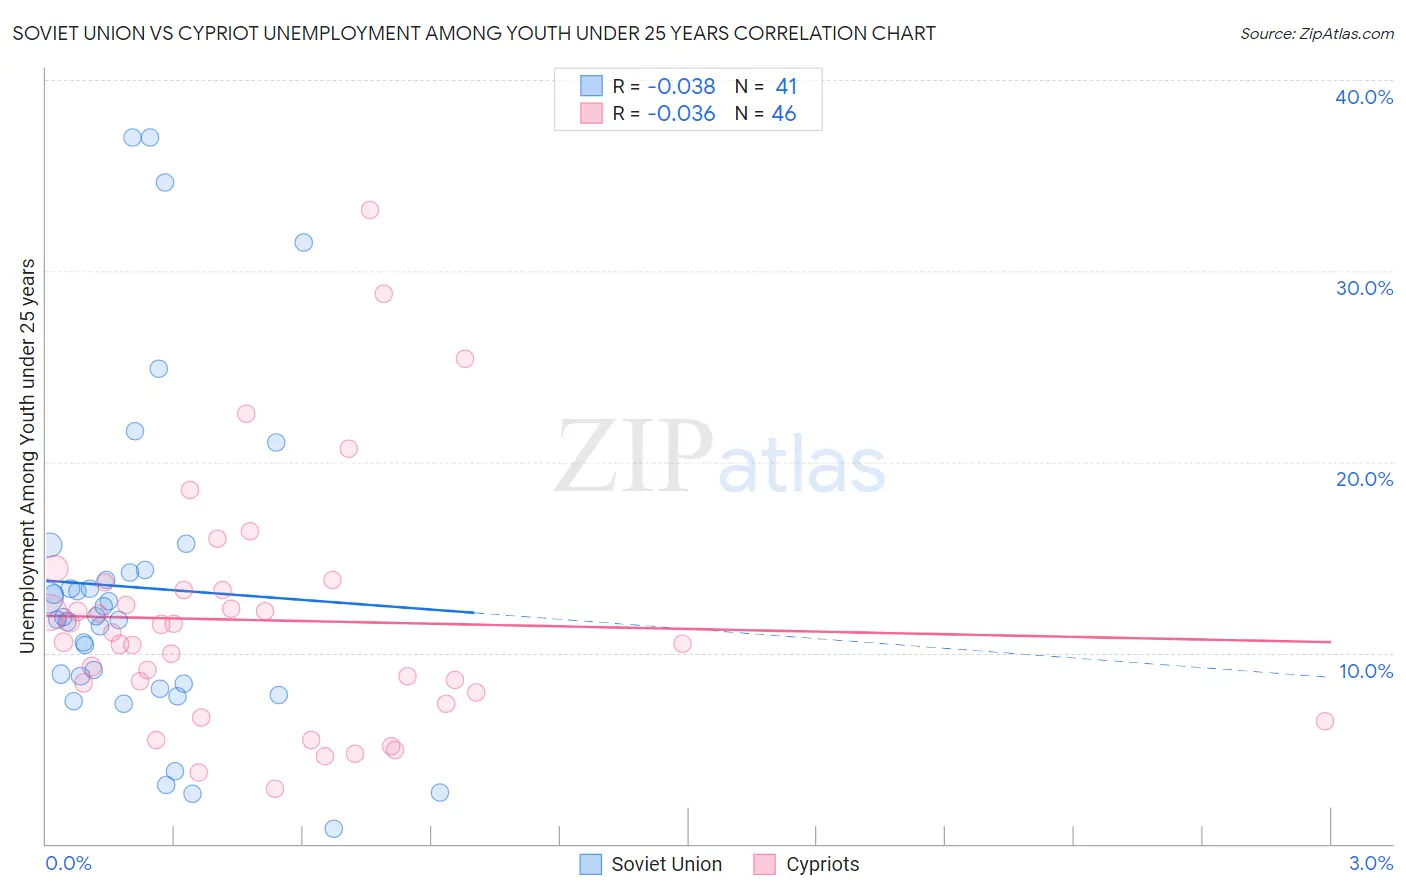 Soviet Union vs Cypriot Unemployment Among Youth under 25 years